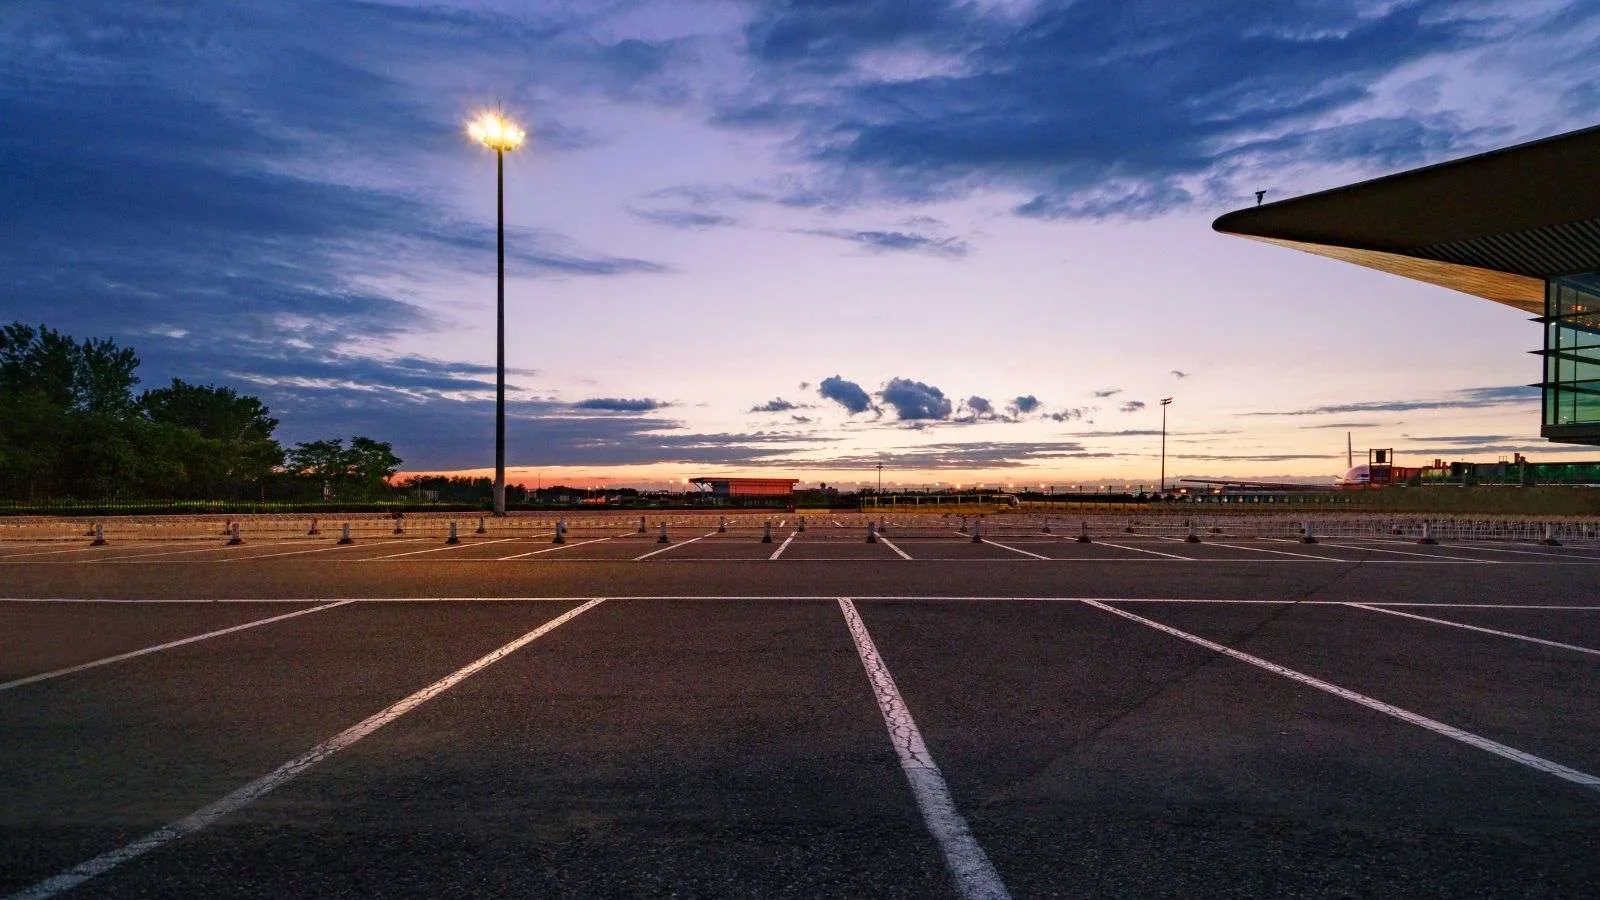 Dark parking lot with one light - bighomeprojects.com